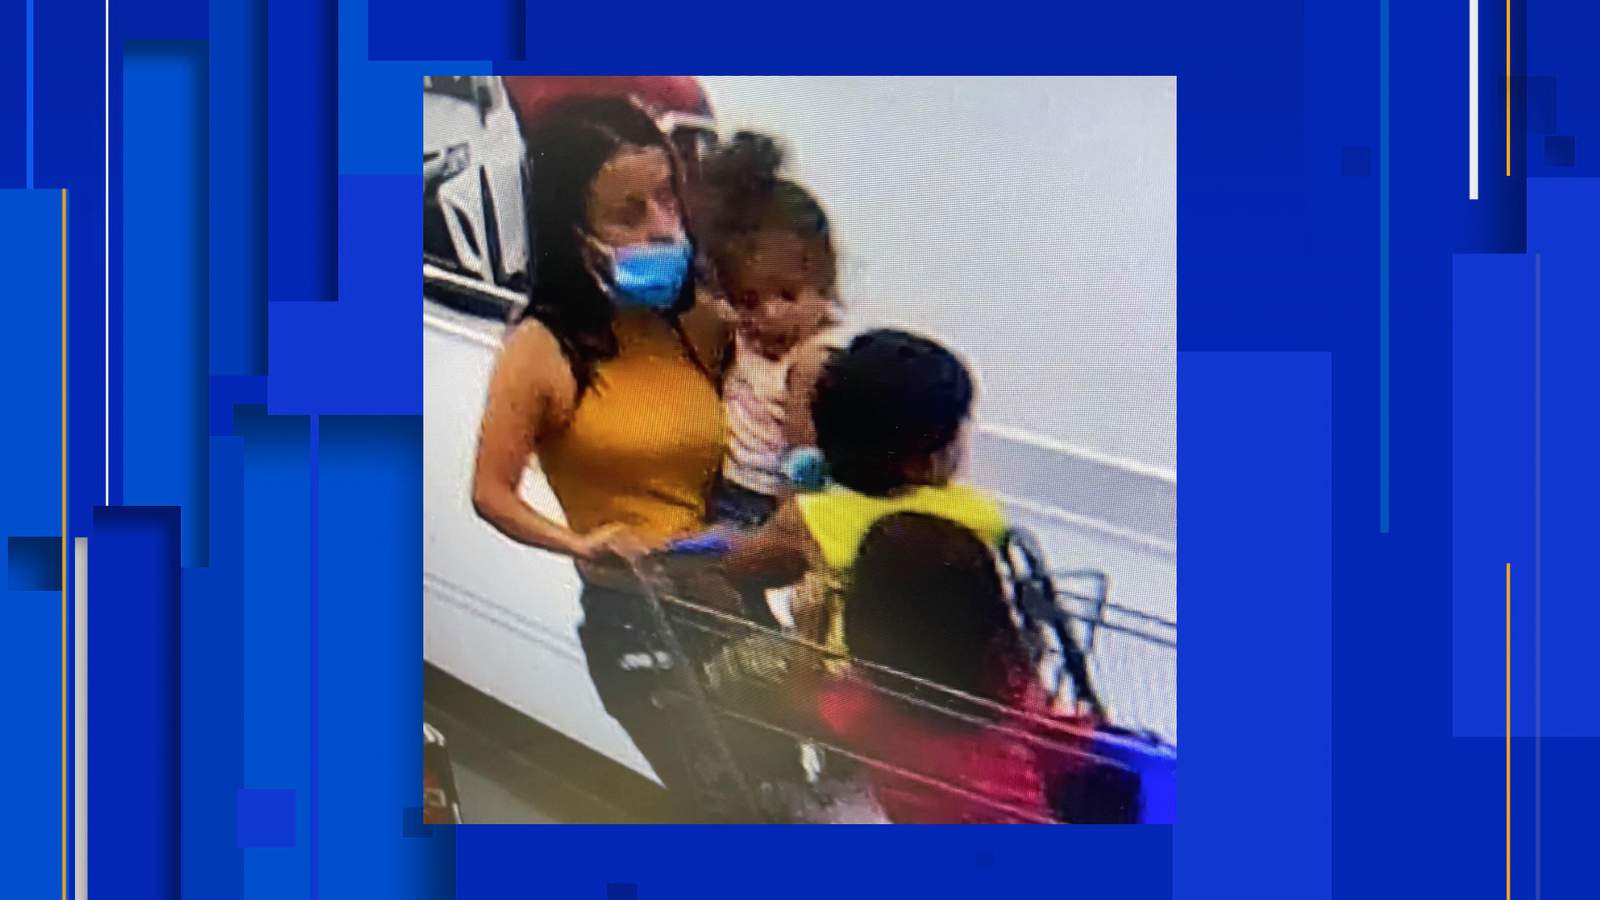 3 missing children, 19-year-old woman found safe in Corpus Christi, police say